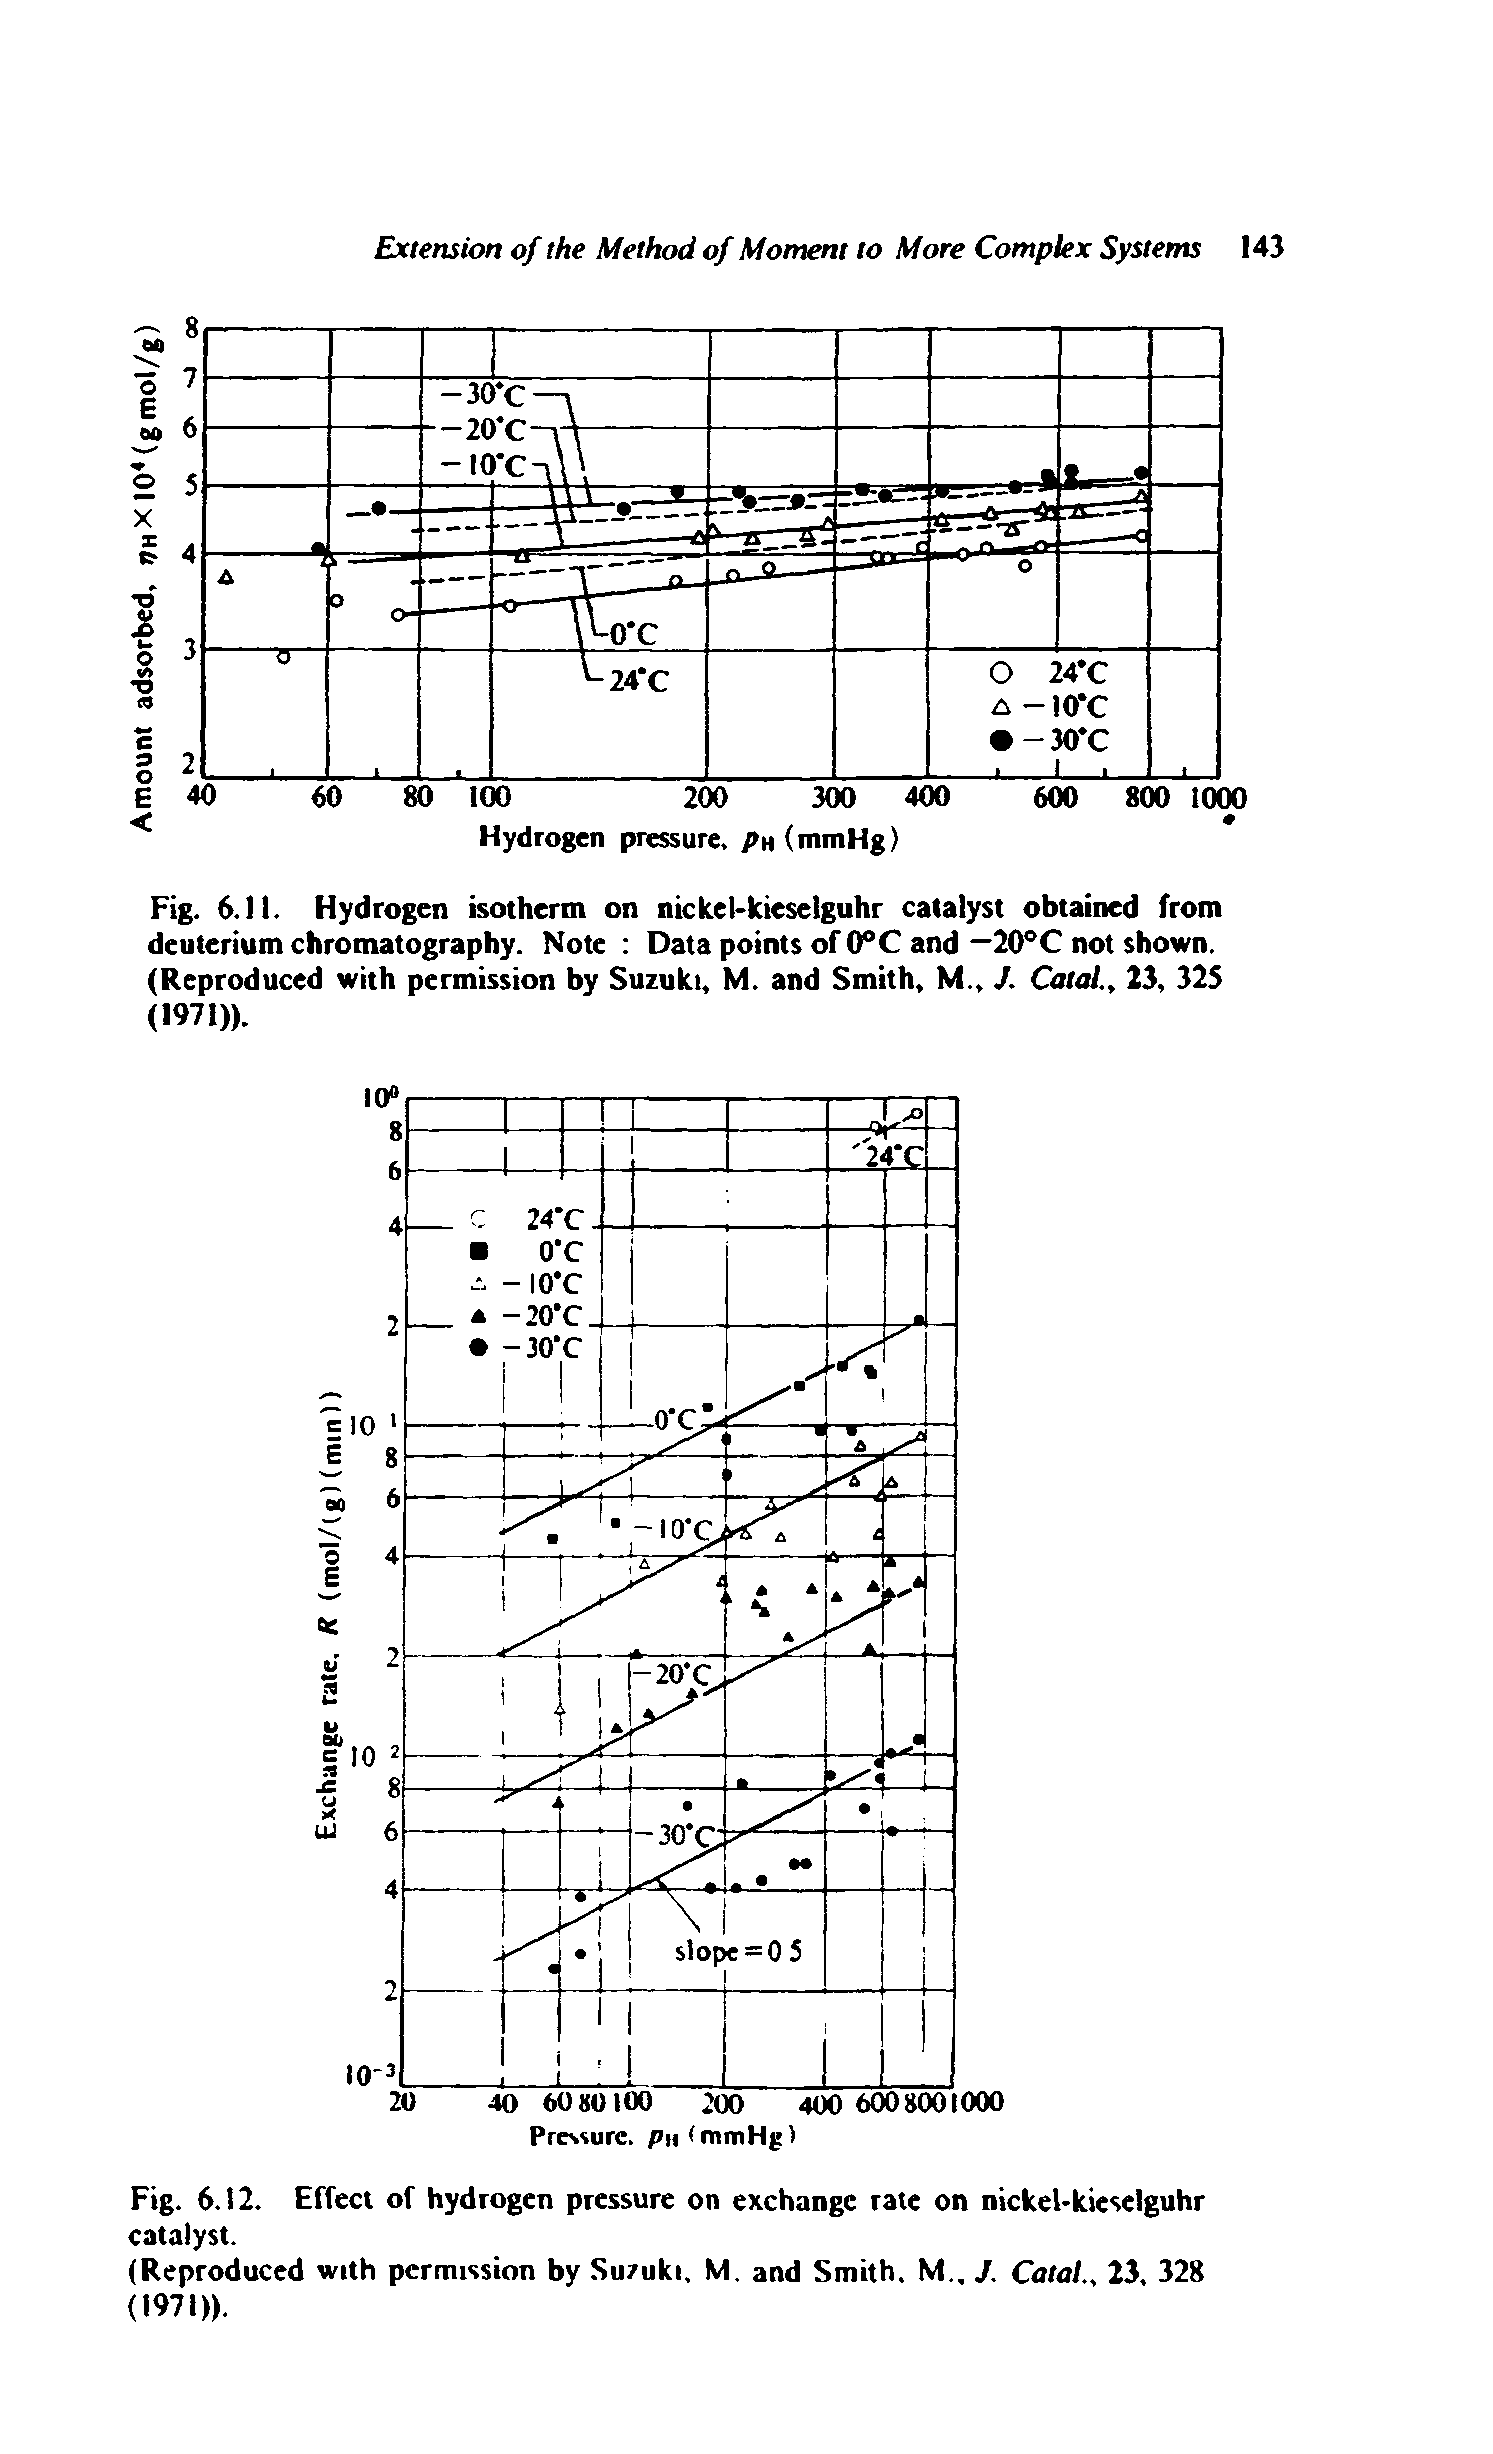 Fig. 6.11. Hydrogen isotherm on nickel-kieselguhr catalyst obtained from deuterium chromatography. Note Data points of 0 C and—20 C not shown. (Reproduced with permission by Suzuki, M. and Smith, M., J. Catai, 23, 325 (1971)).